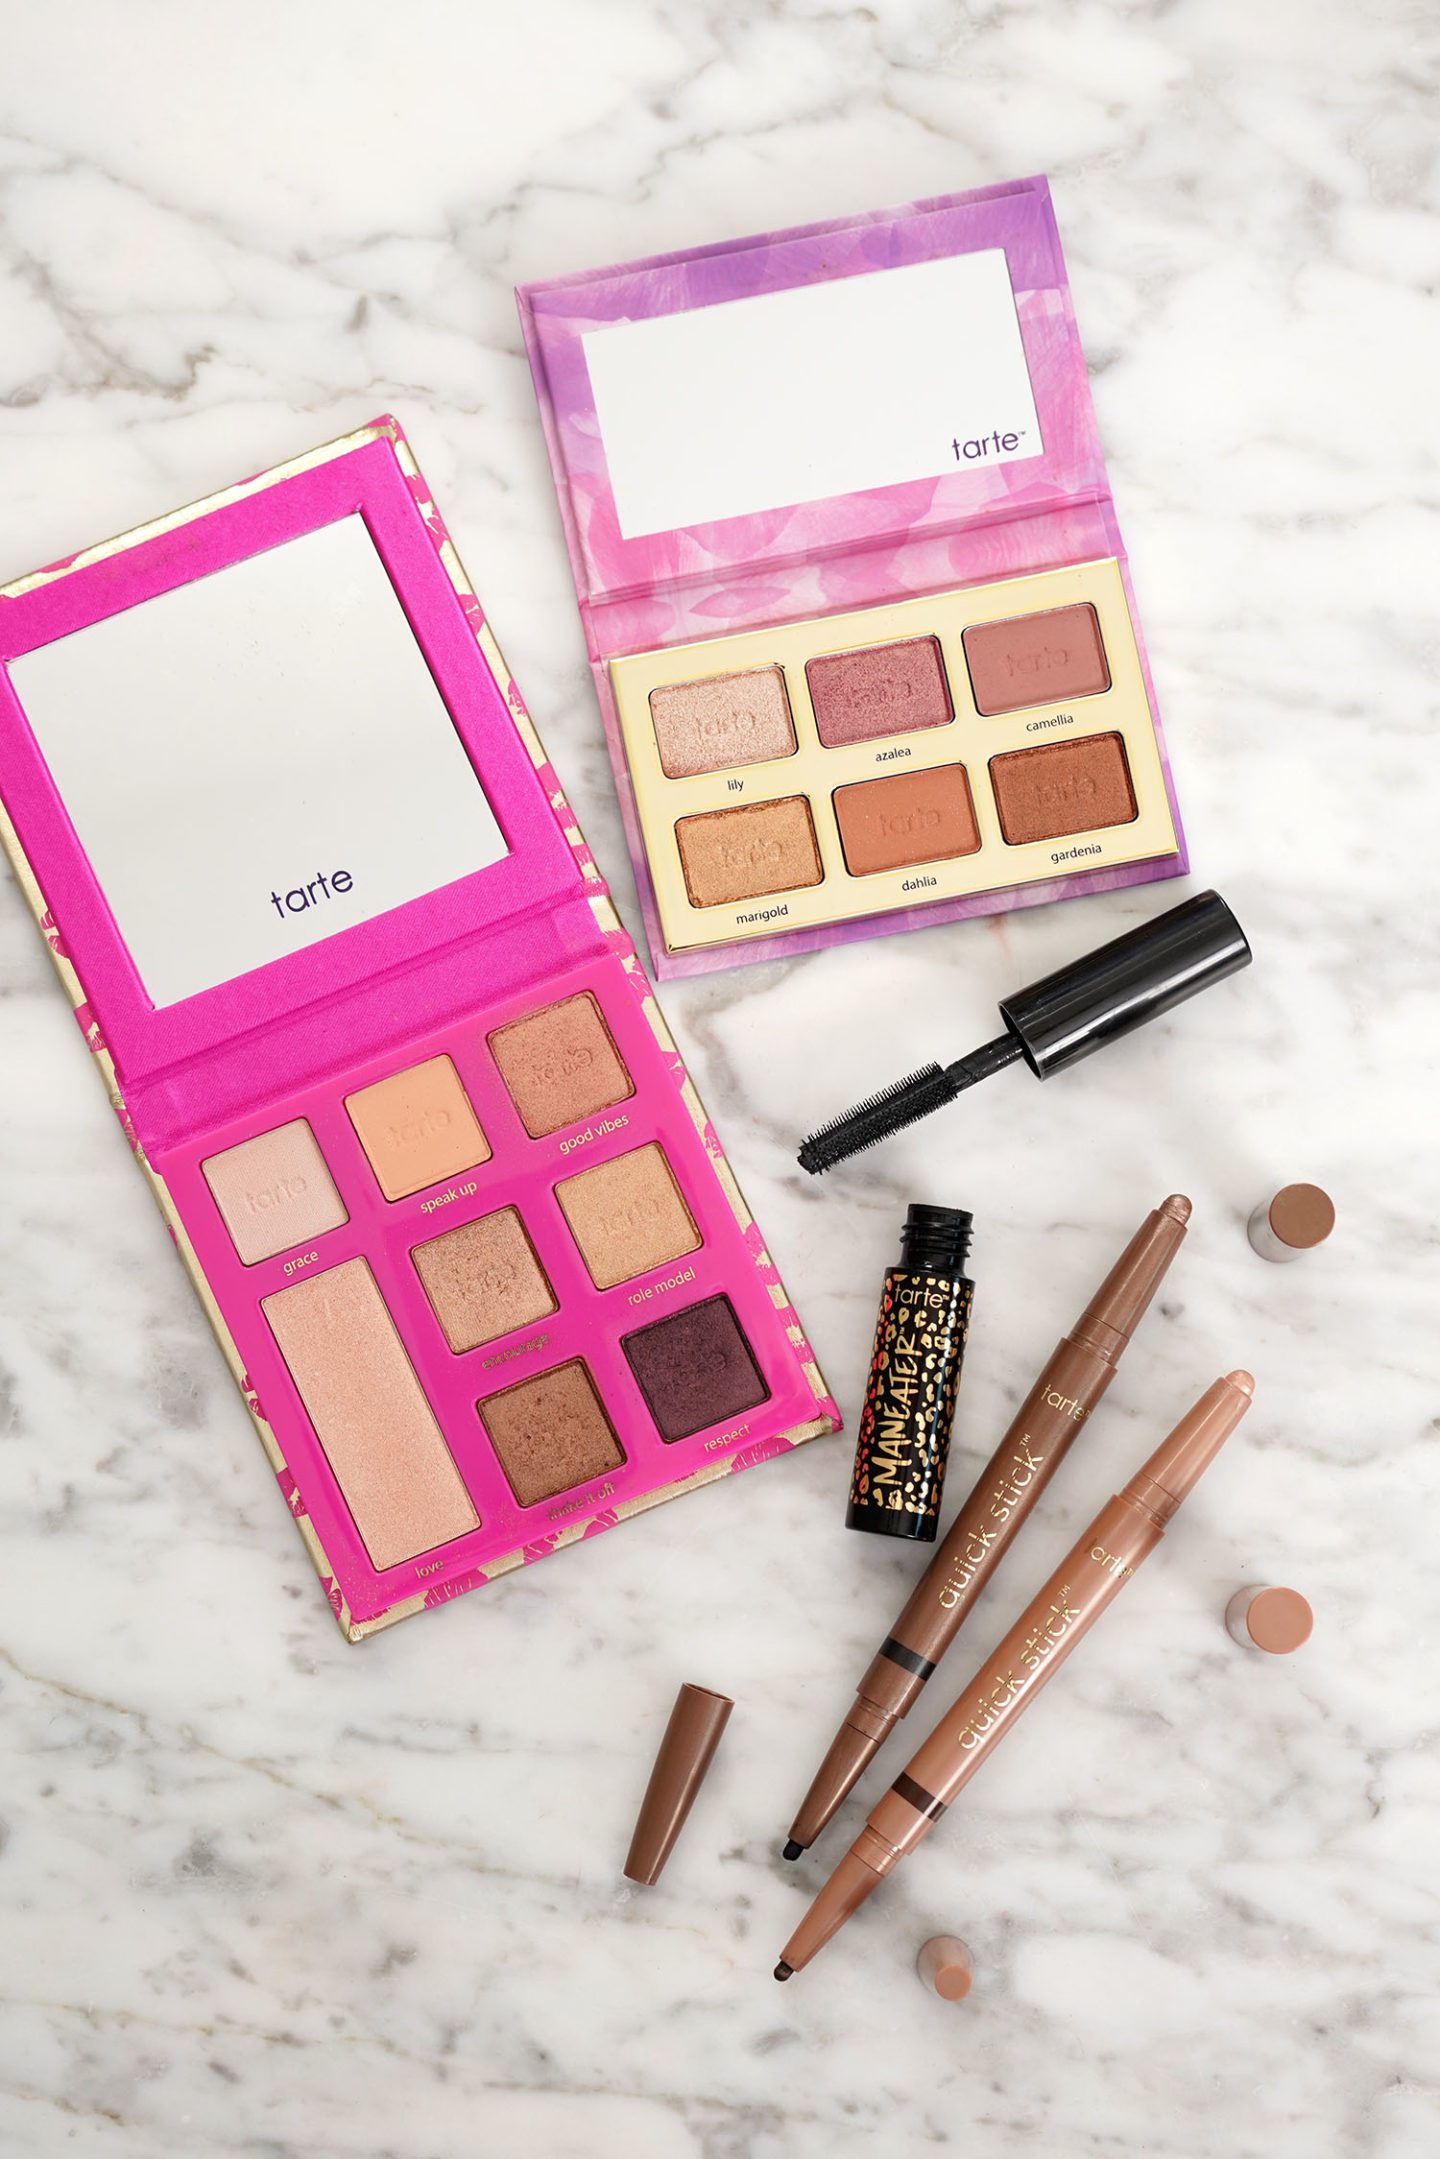 Tarte Leave Your Mark Eyeshadow Palette and Tartlette Baby Bloom